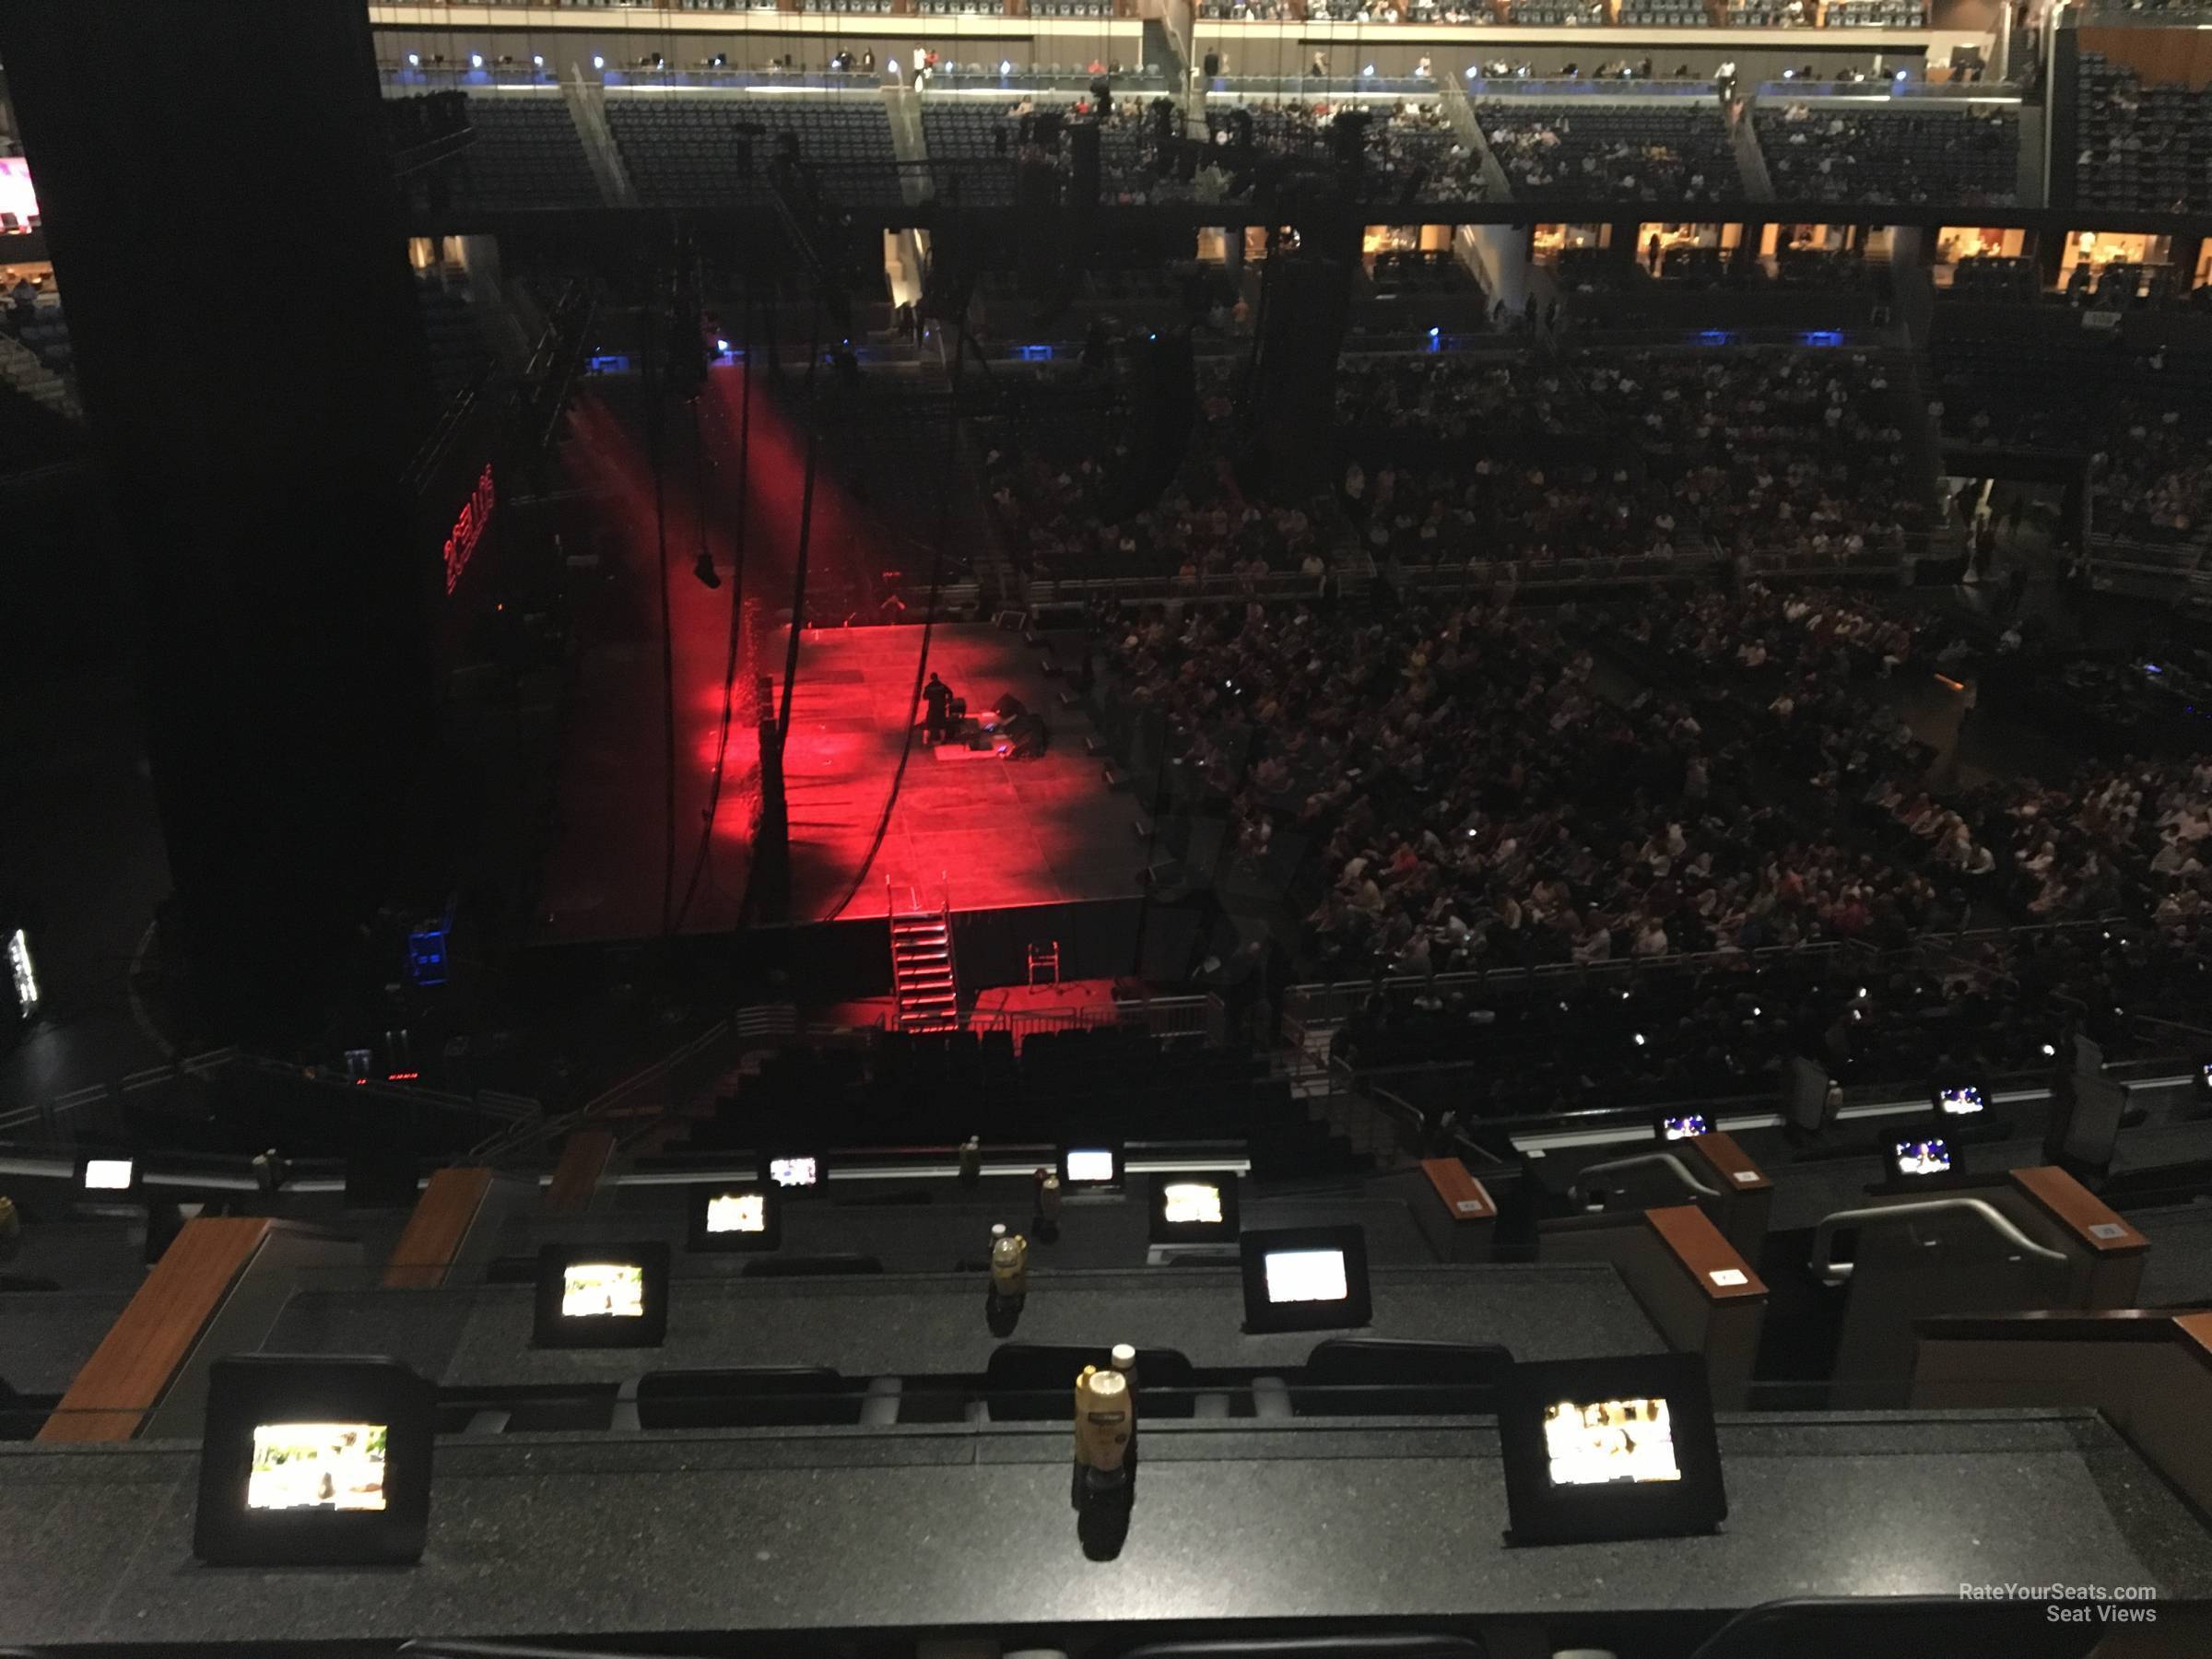 section k, row 5 seat view  for concert - amway center